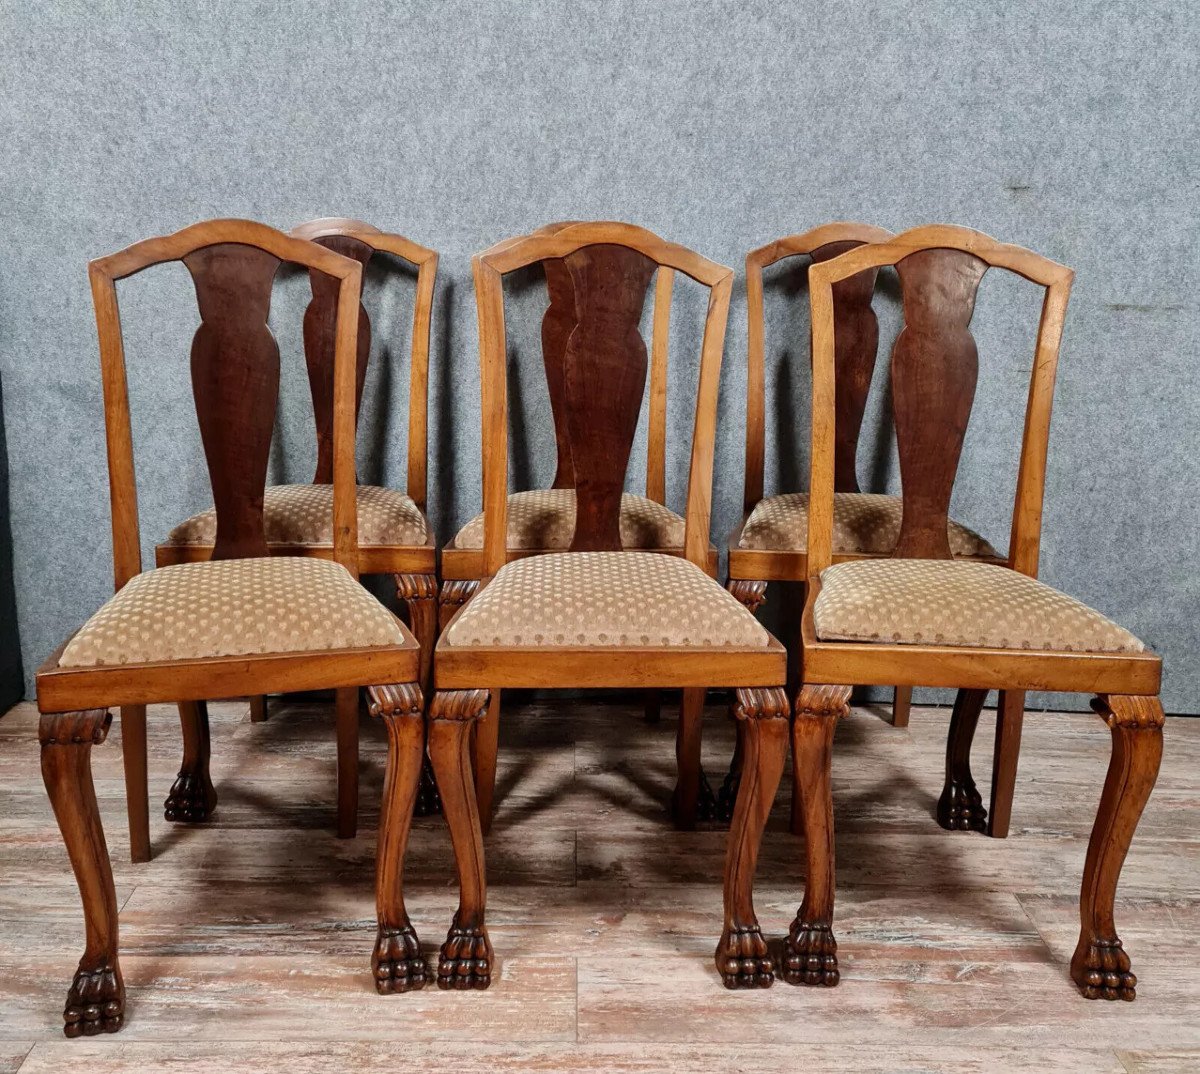 Series Of 6 Chippendale Chairs In Alternating Light Mahogany And Dark Mahogany-photo-4